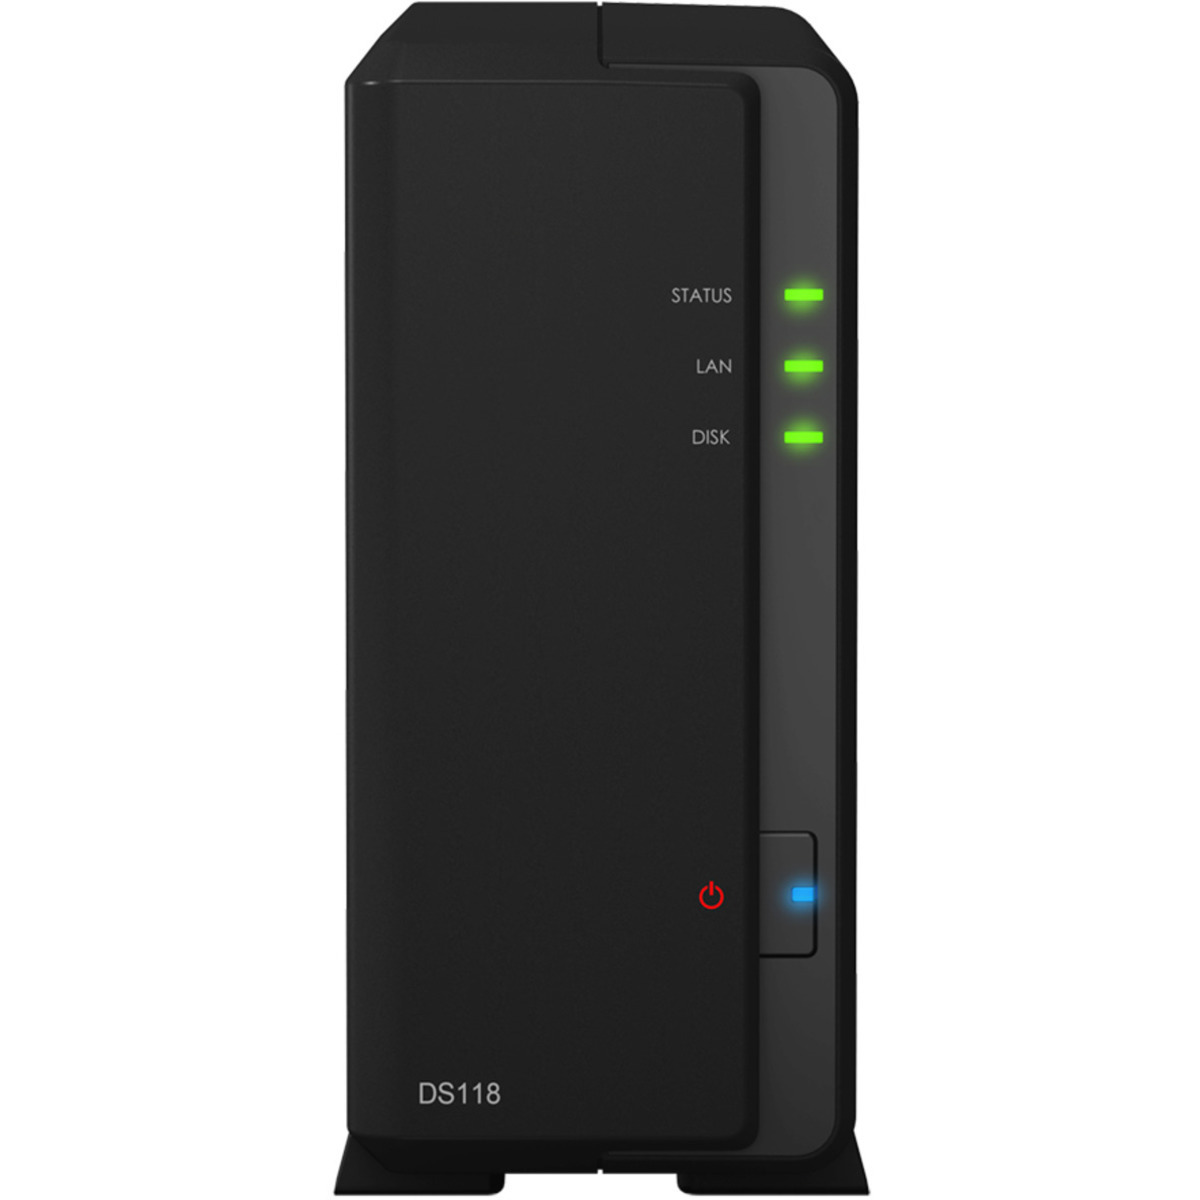 buy $310 Synology DiskStation DS118 4tb Desktop NAS - Network Attached Storage Device 1x4000gb Toshiba MN Series MN08ADA400E 3.5 7200rpm SATA 6Gb/s HDD NAS Class Drives Installed - Burn-In Tested - ON SALE - nas headquarters buy network attached storage server device das new raid-5 free shipping simply usa DiskStation DS118